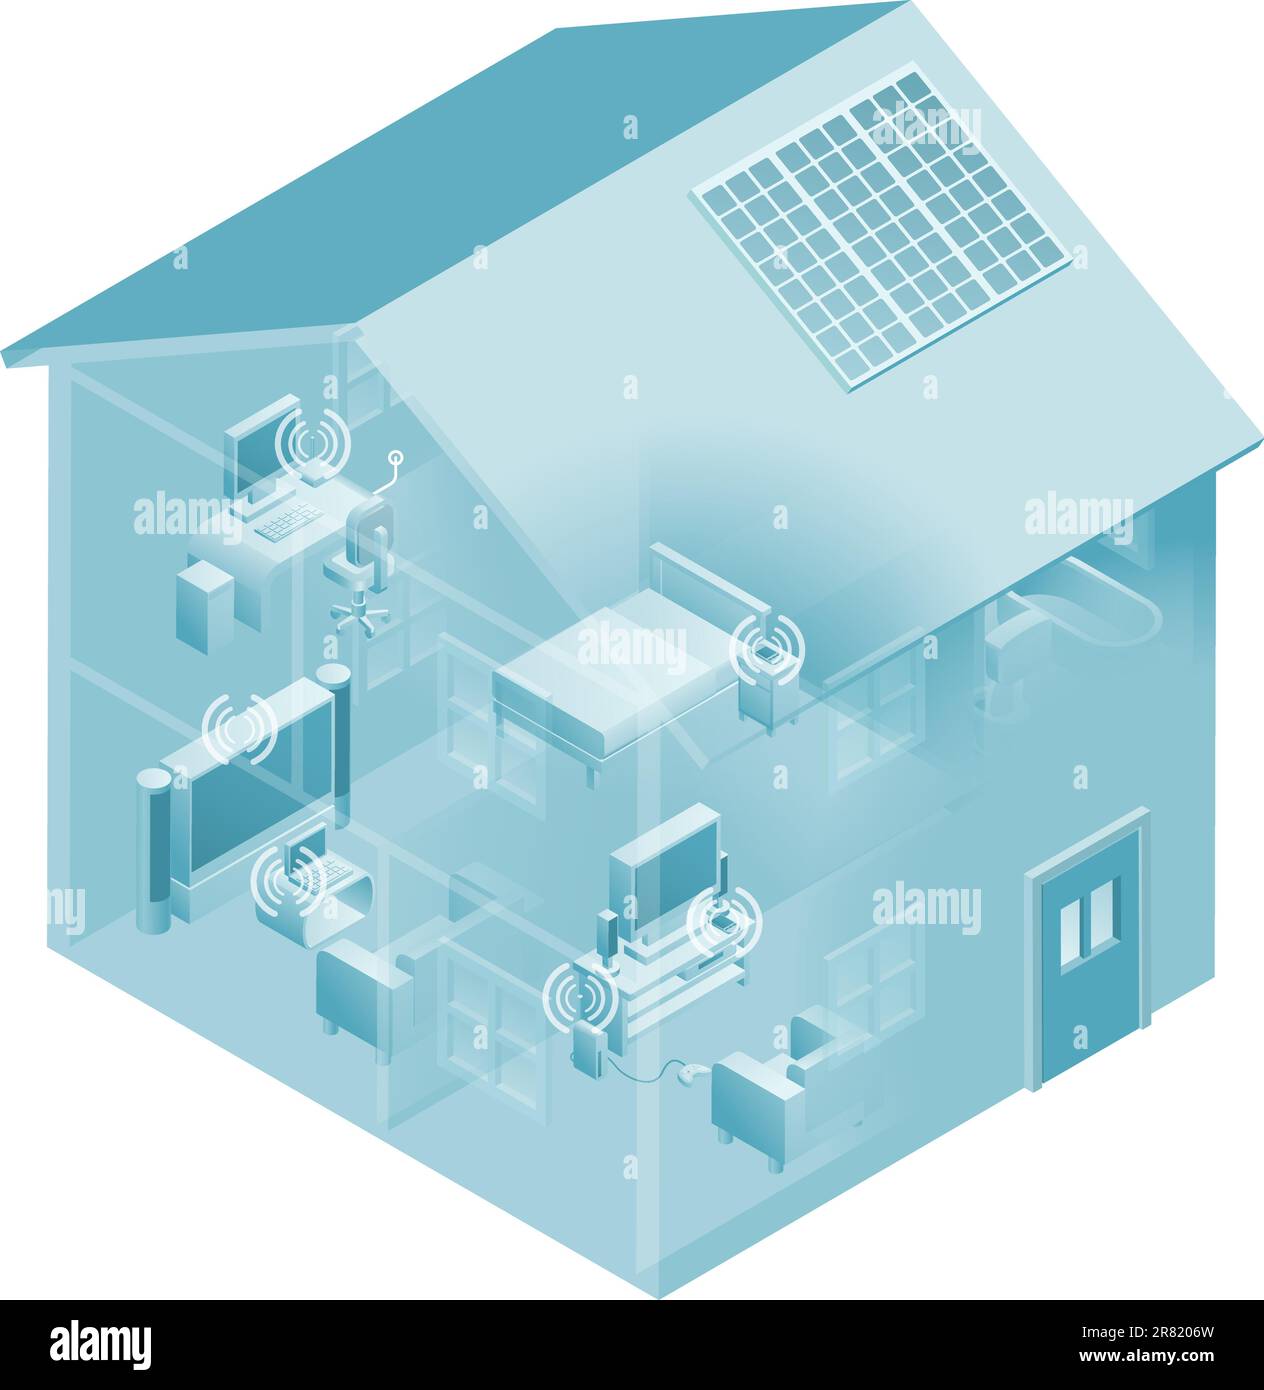 Local area network with devices like phones, games consoles, pc desktop computer, laptop, and tv connected in a network, wired and wireless. Stock Vector